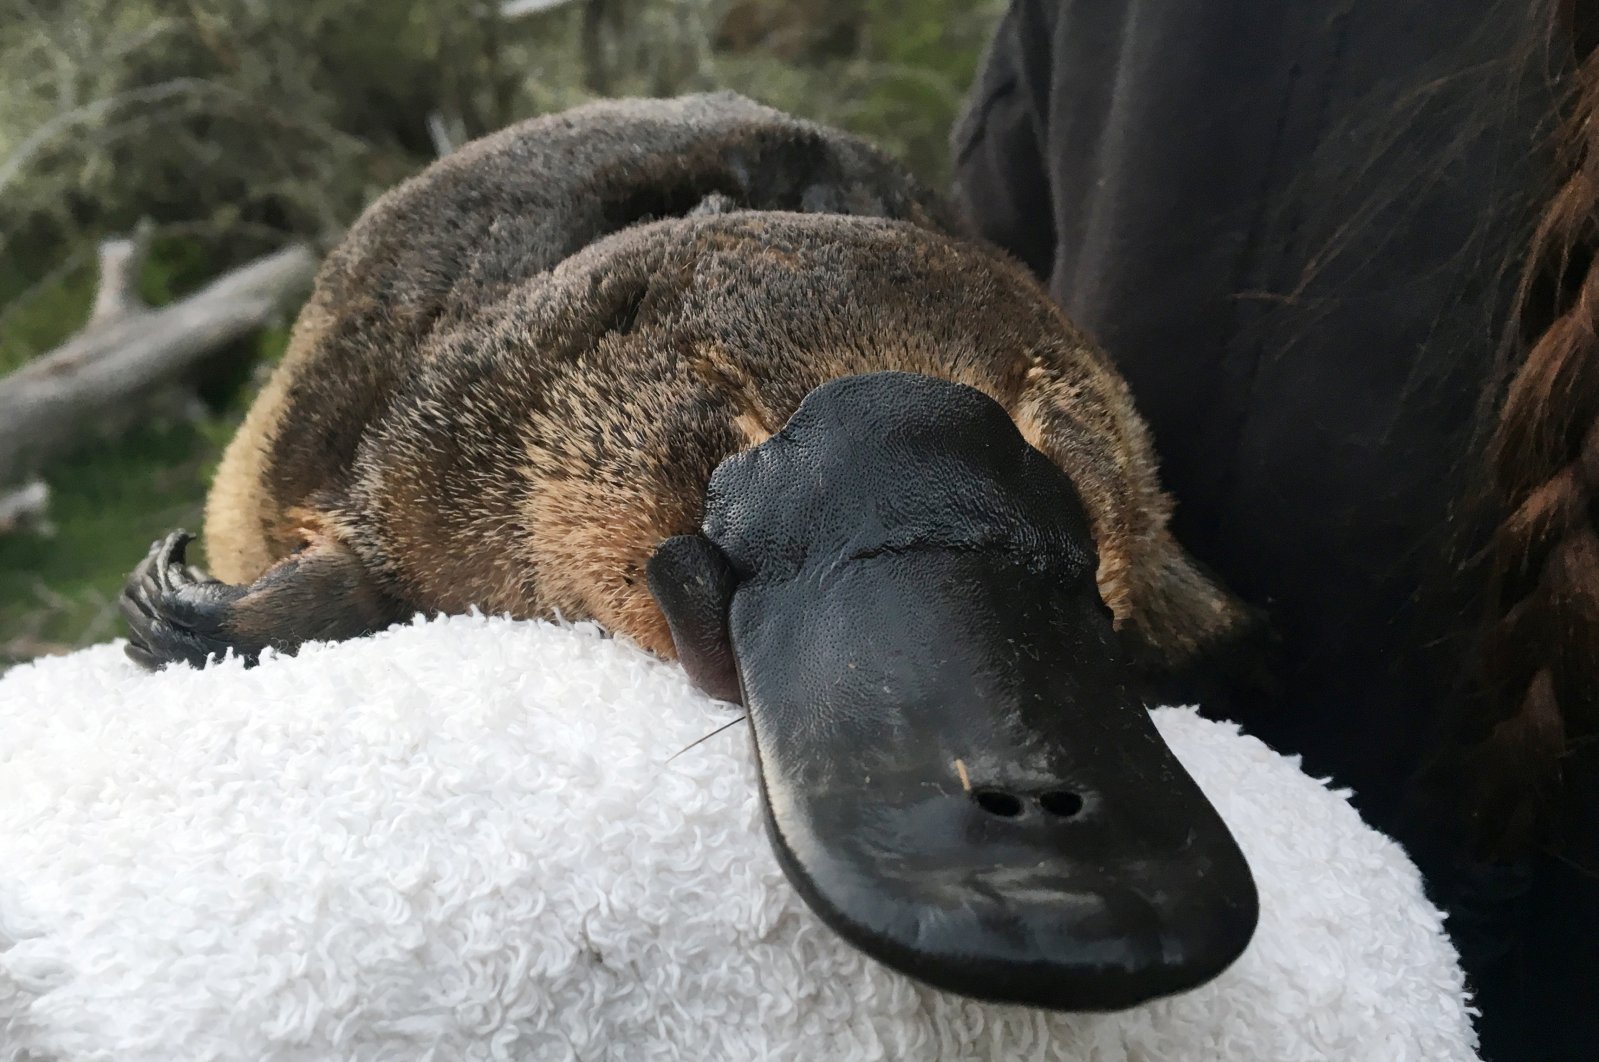 This undated image shows a platypus being surveyed by researchers for the Platypus Conservation Initiative in New South Wales, Australia. (AAP Image/Supplied by UNSW via REUTERS)